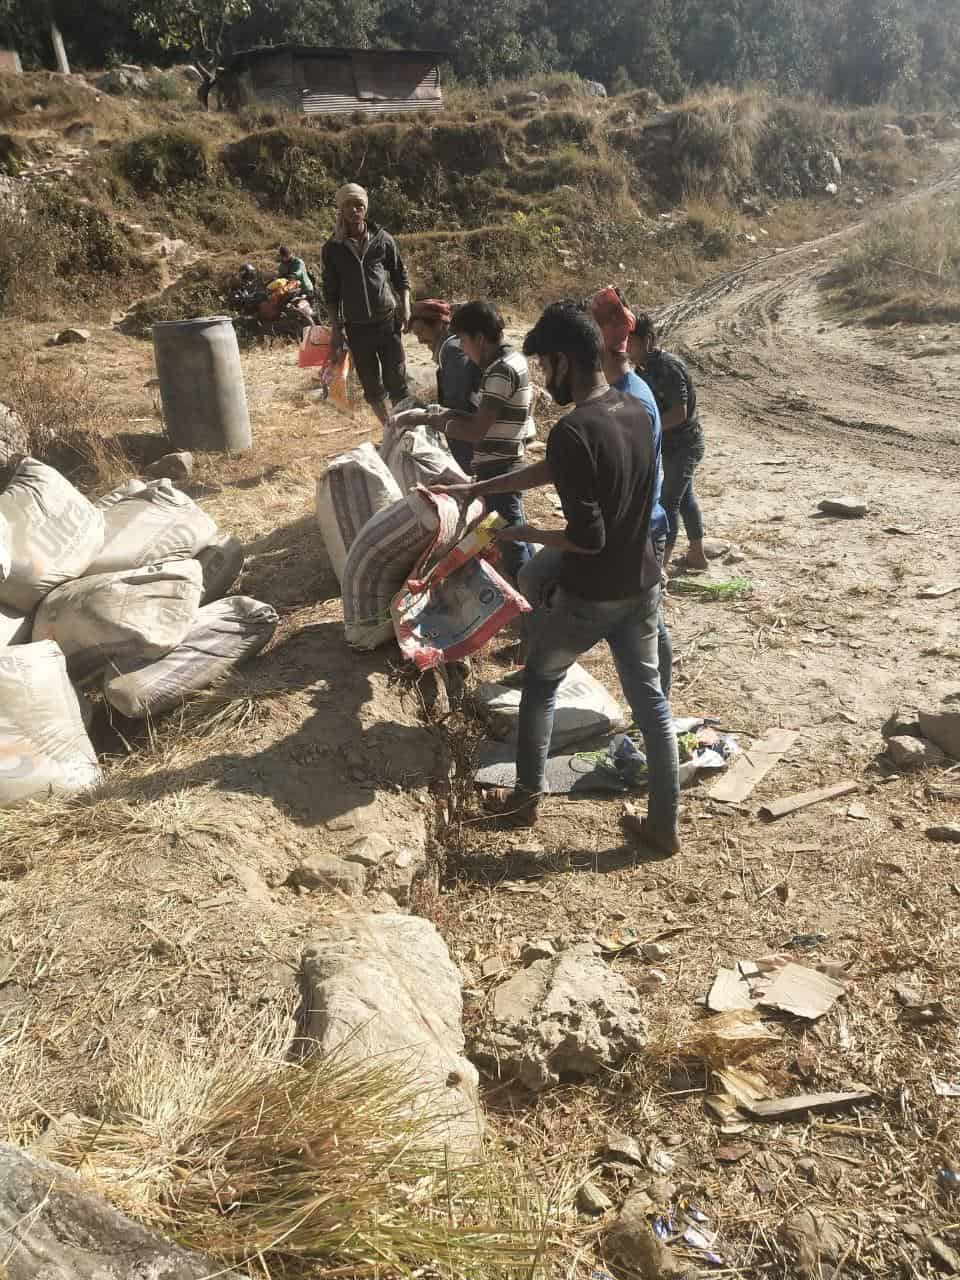 Workers lift bags of cement for the new school